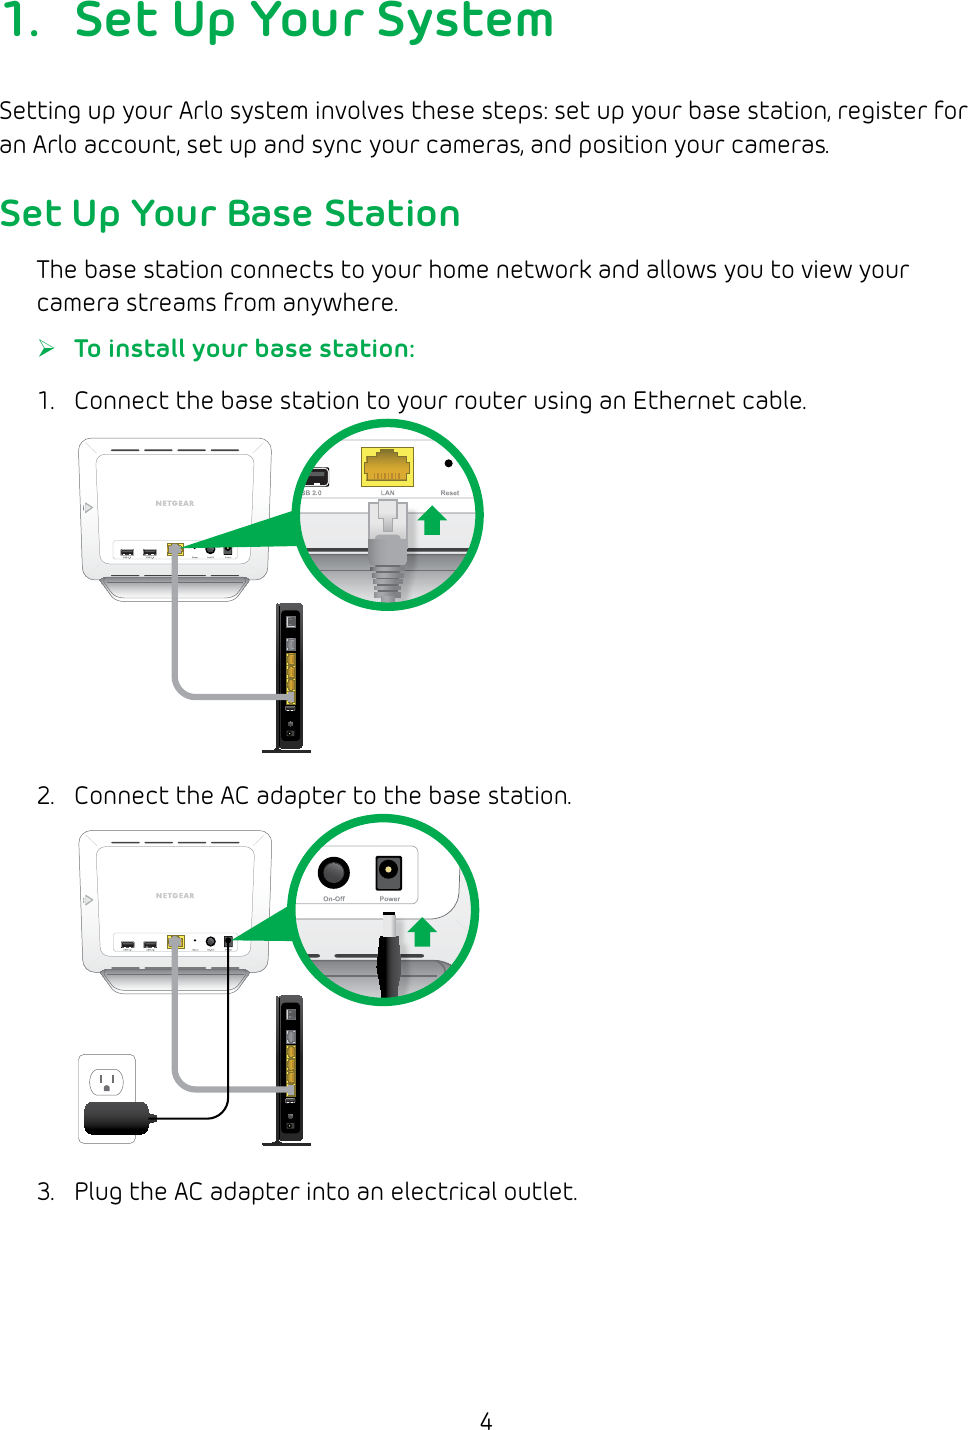 41.  Set Up Your SystemSetting up your Arlo system involves these steps: set up your base station, register for an Arlo account, set up and sync your cameras, and position your cameras.Set Up Your Base StationThe base station connects to your home network and allows you to view your camera streams from anywhere. ¾To install your base station:1.  Connect the base station to your router using an Ethernet cable.2.  Connect the AC adapter to the base station.3.  Plug the AC adapter into an electrical outlet.